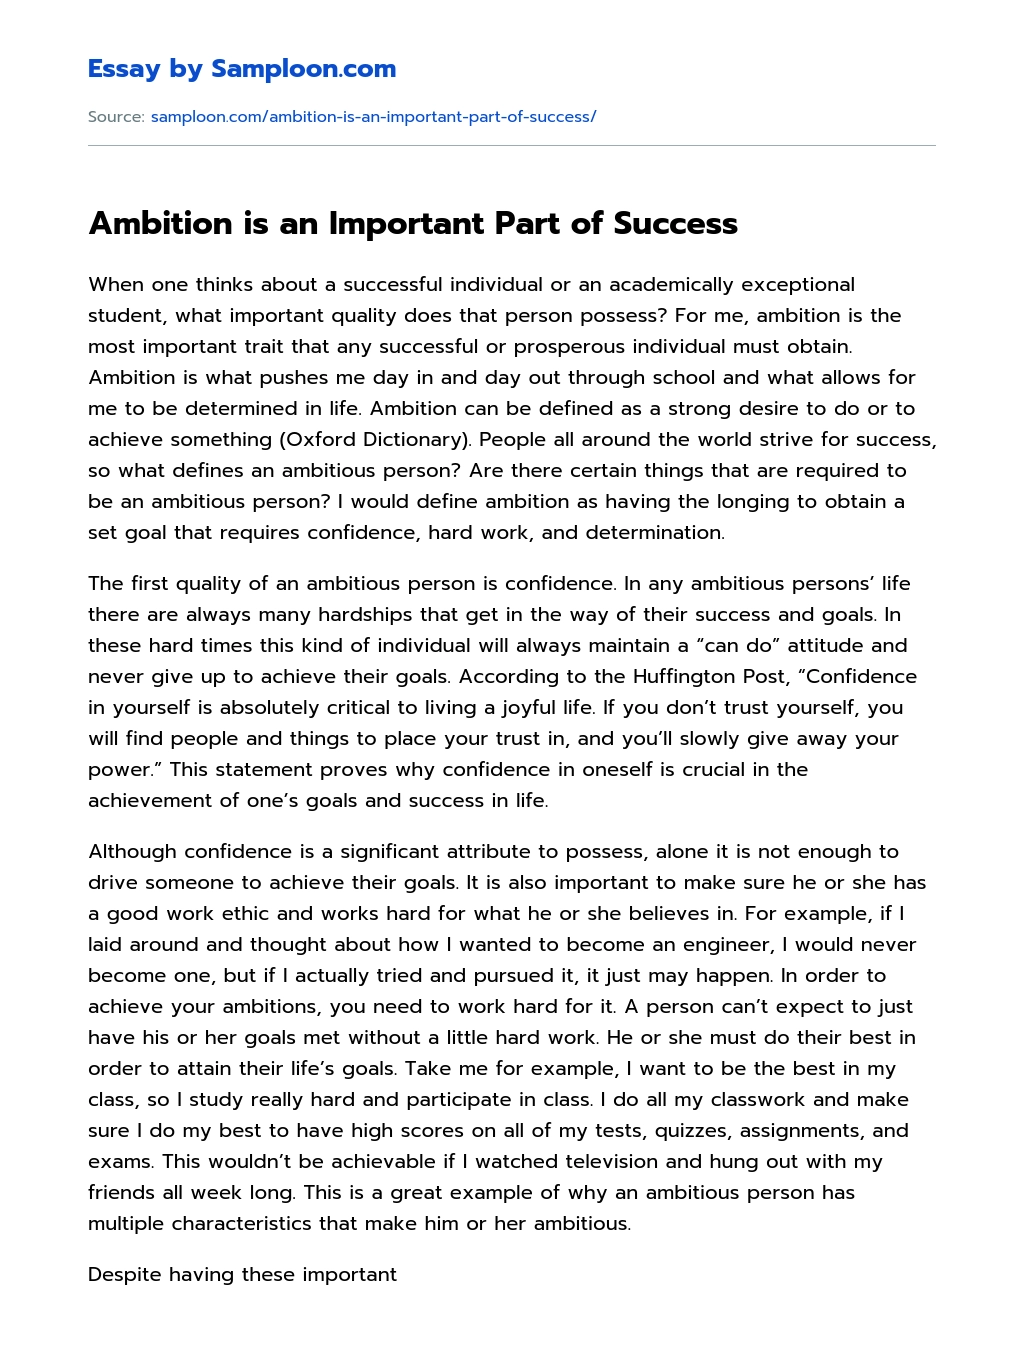 Ambition is an Important Part of Success essay